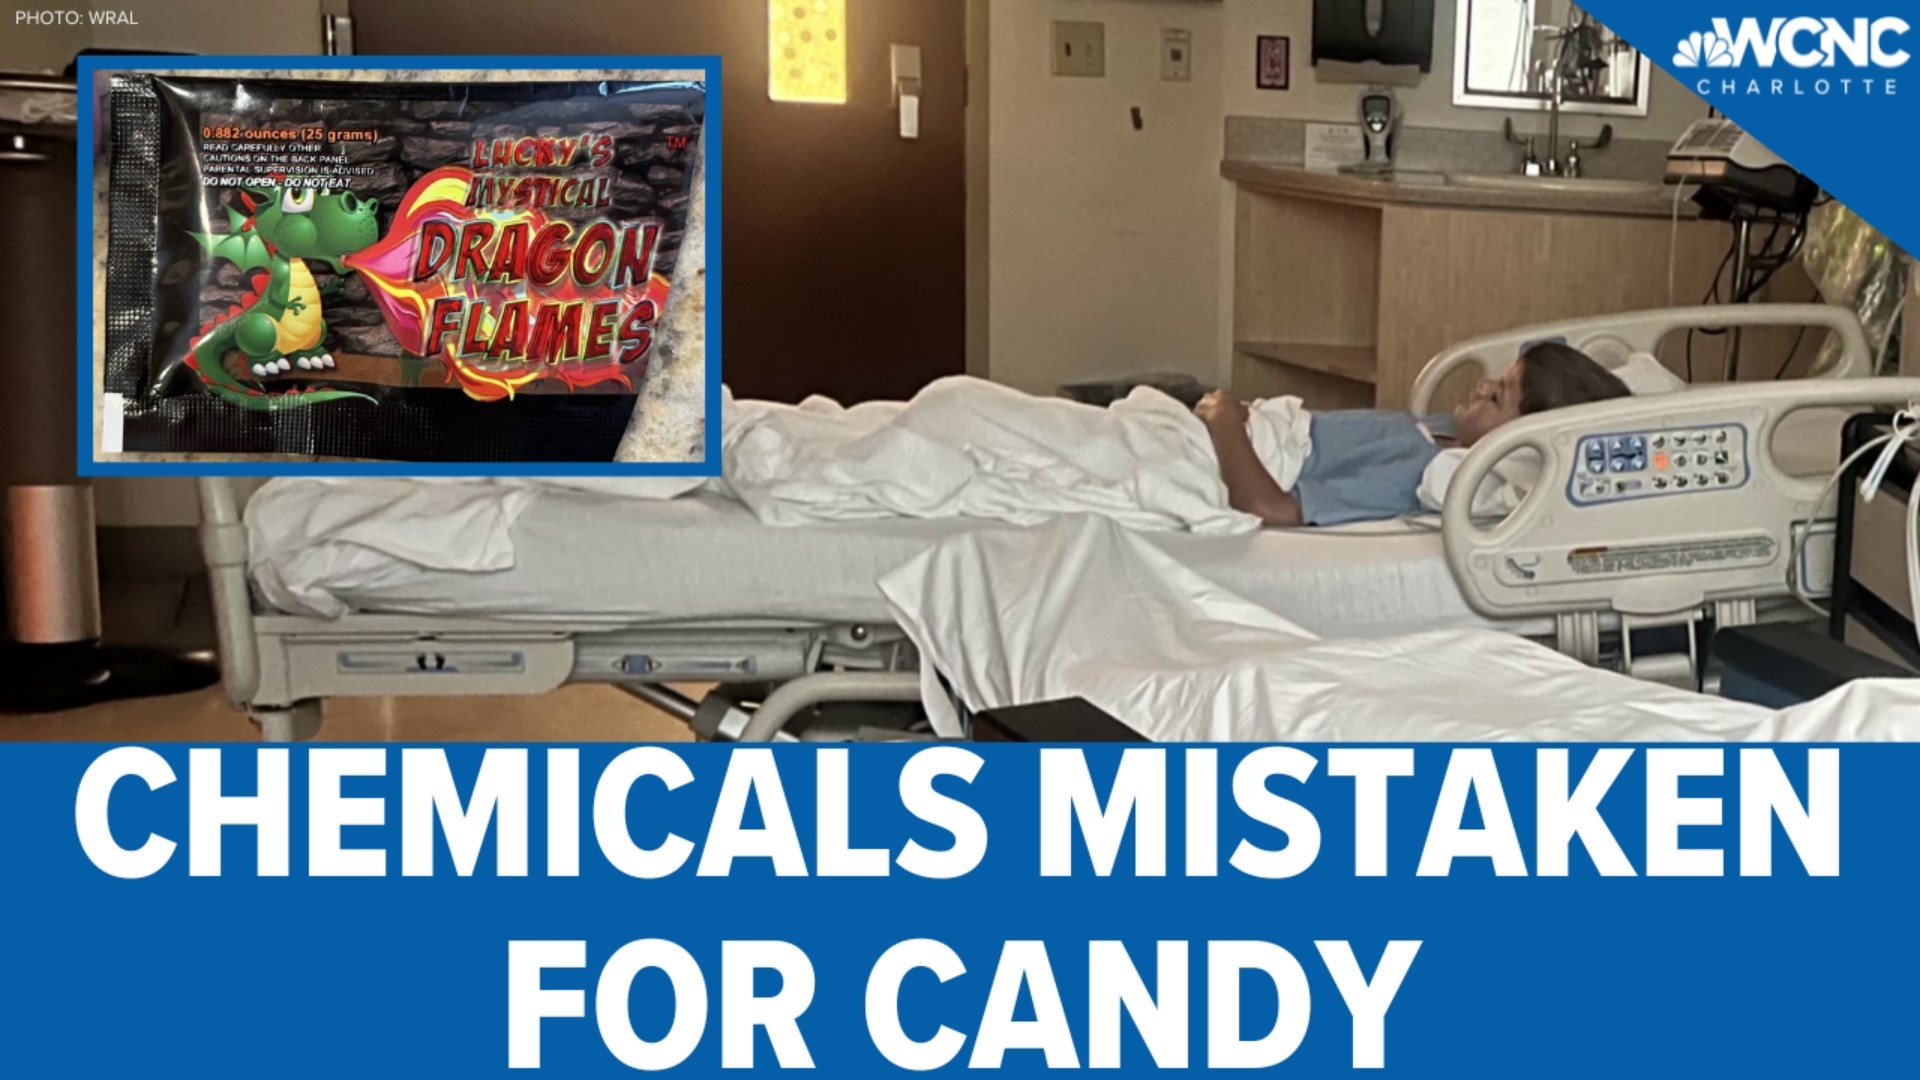 A Cary mom is calling for safer labels, tamper-proof packaging and warnings after her son ingested harmful chemicals, mistaking it for candy.